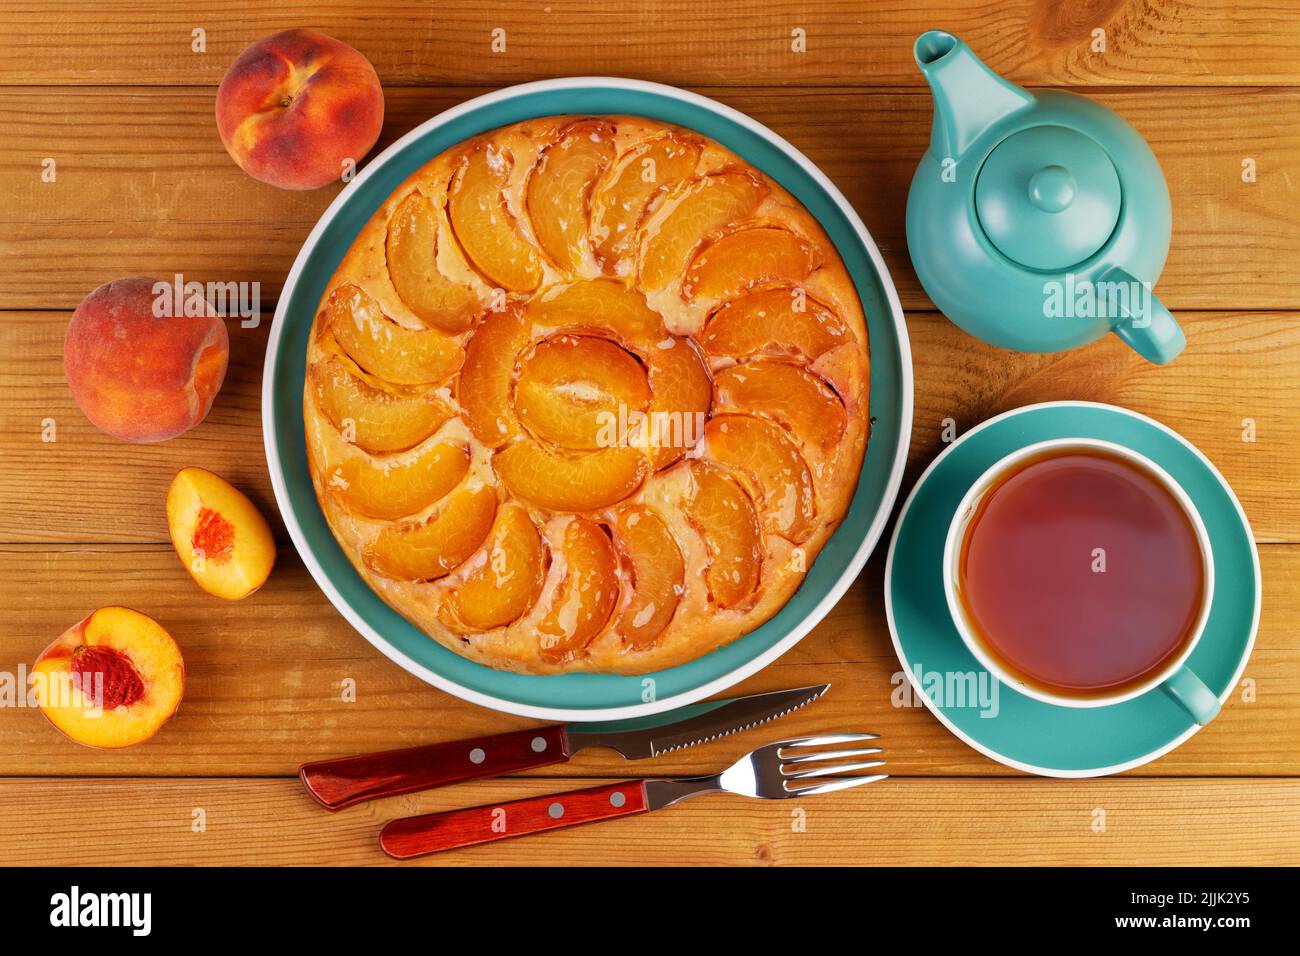 Homemade pie with peaches and cup of tea on wooden table. Top view. Stock Photo